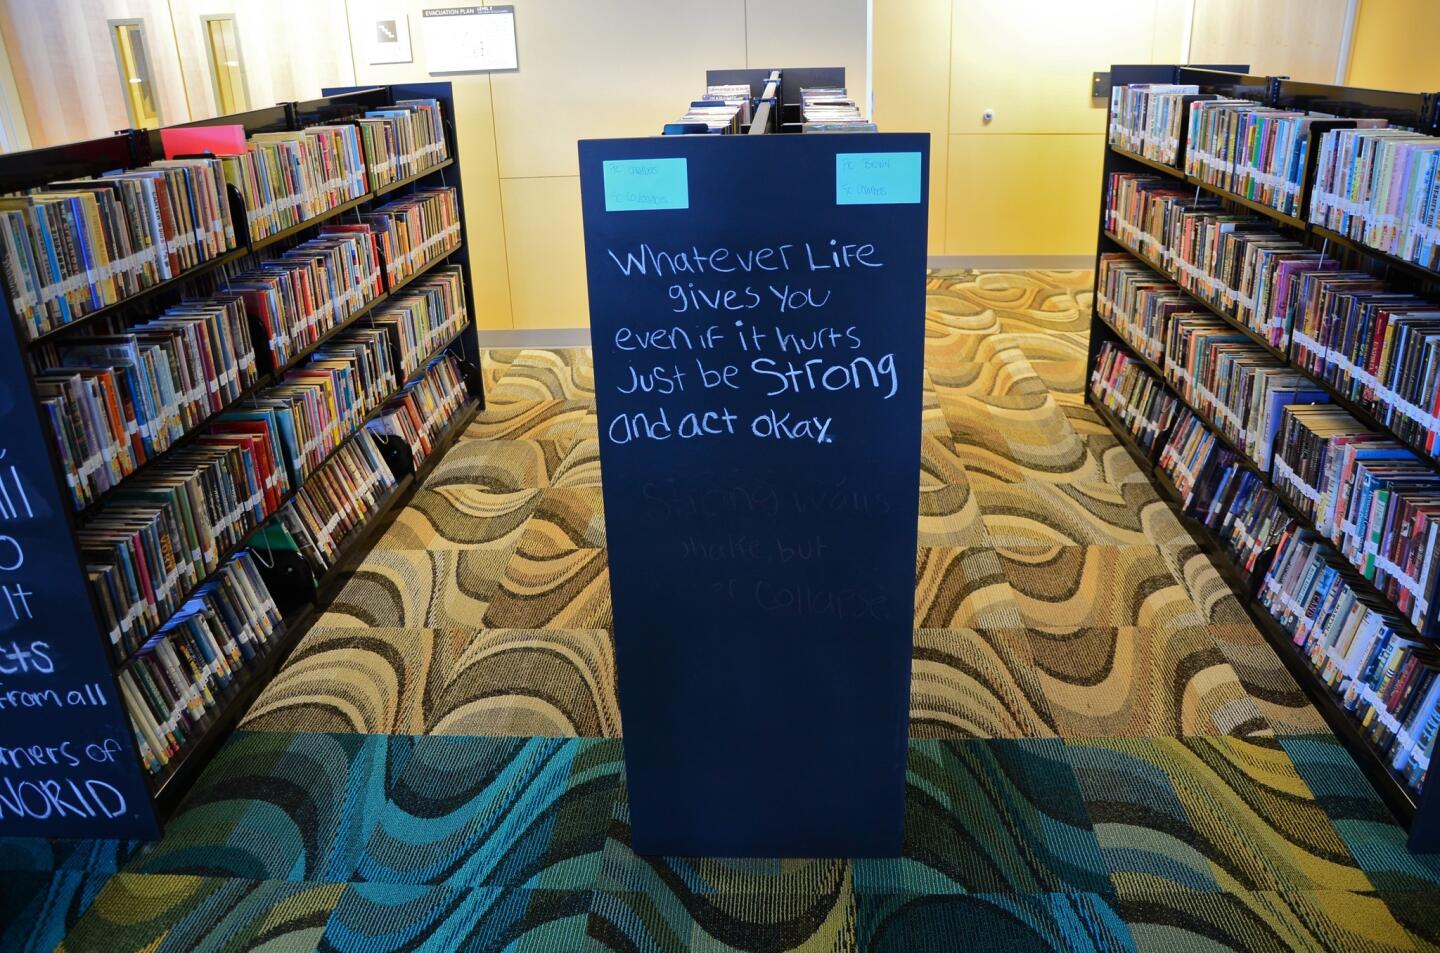 San Diego: Advice from the library